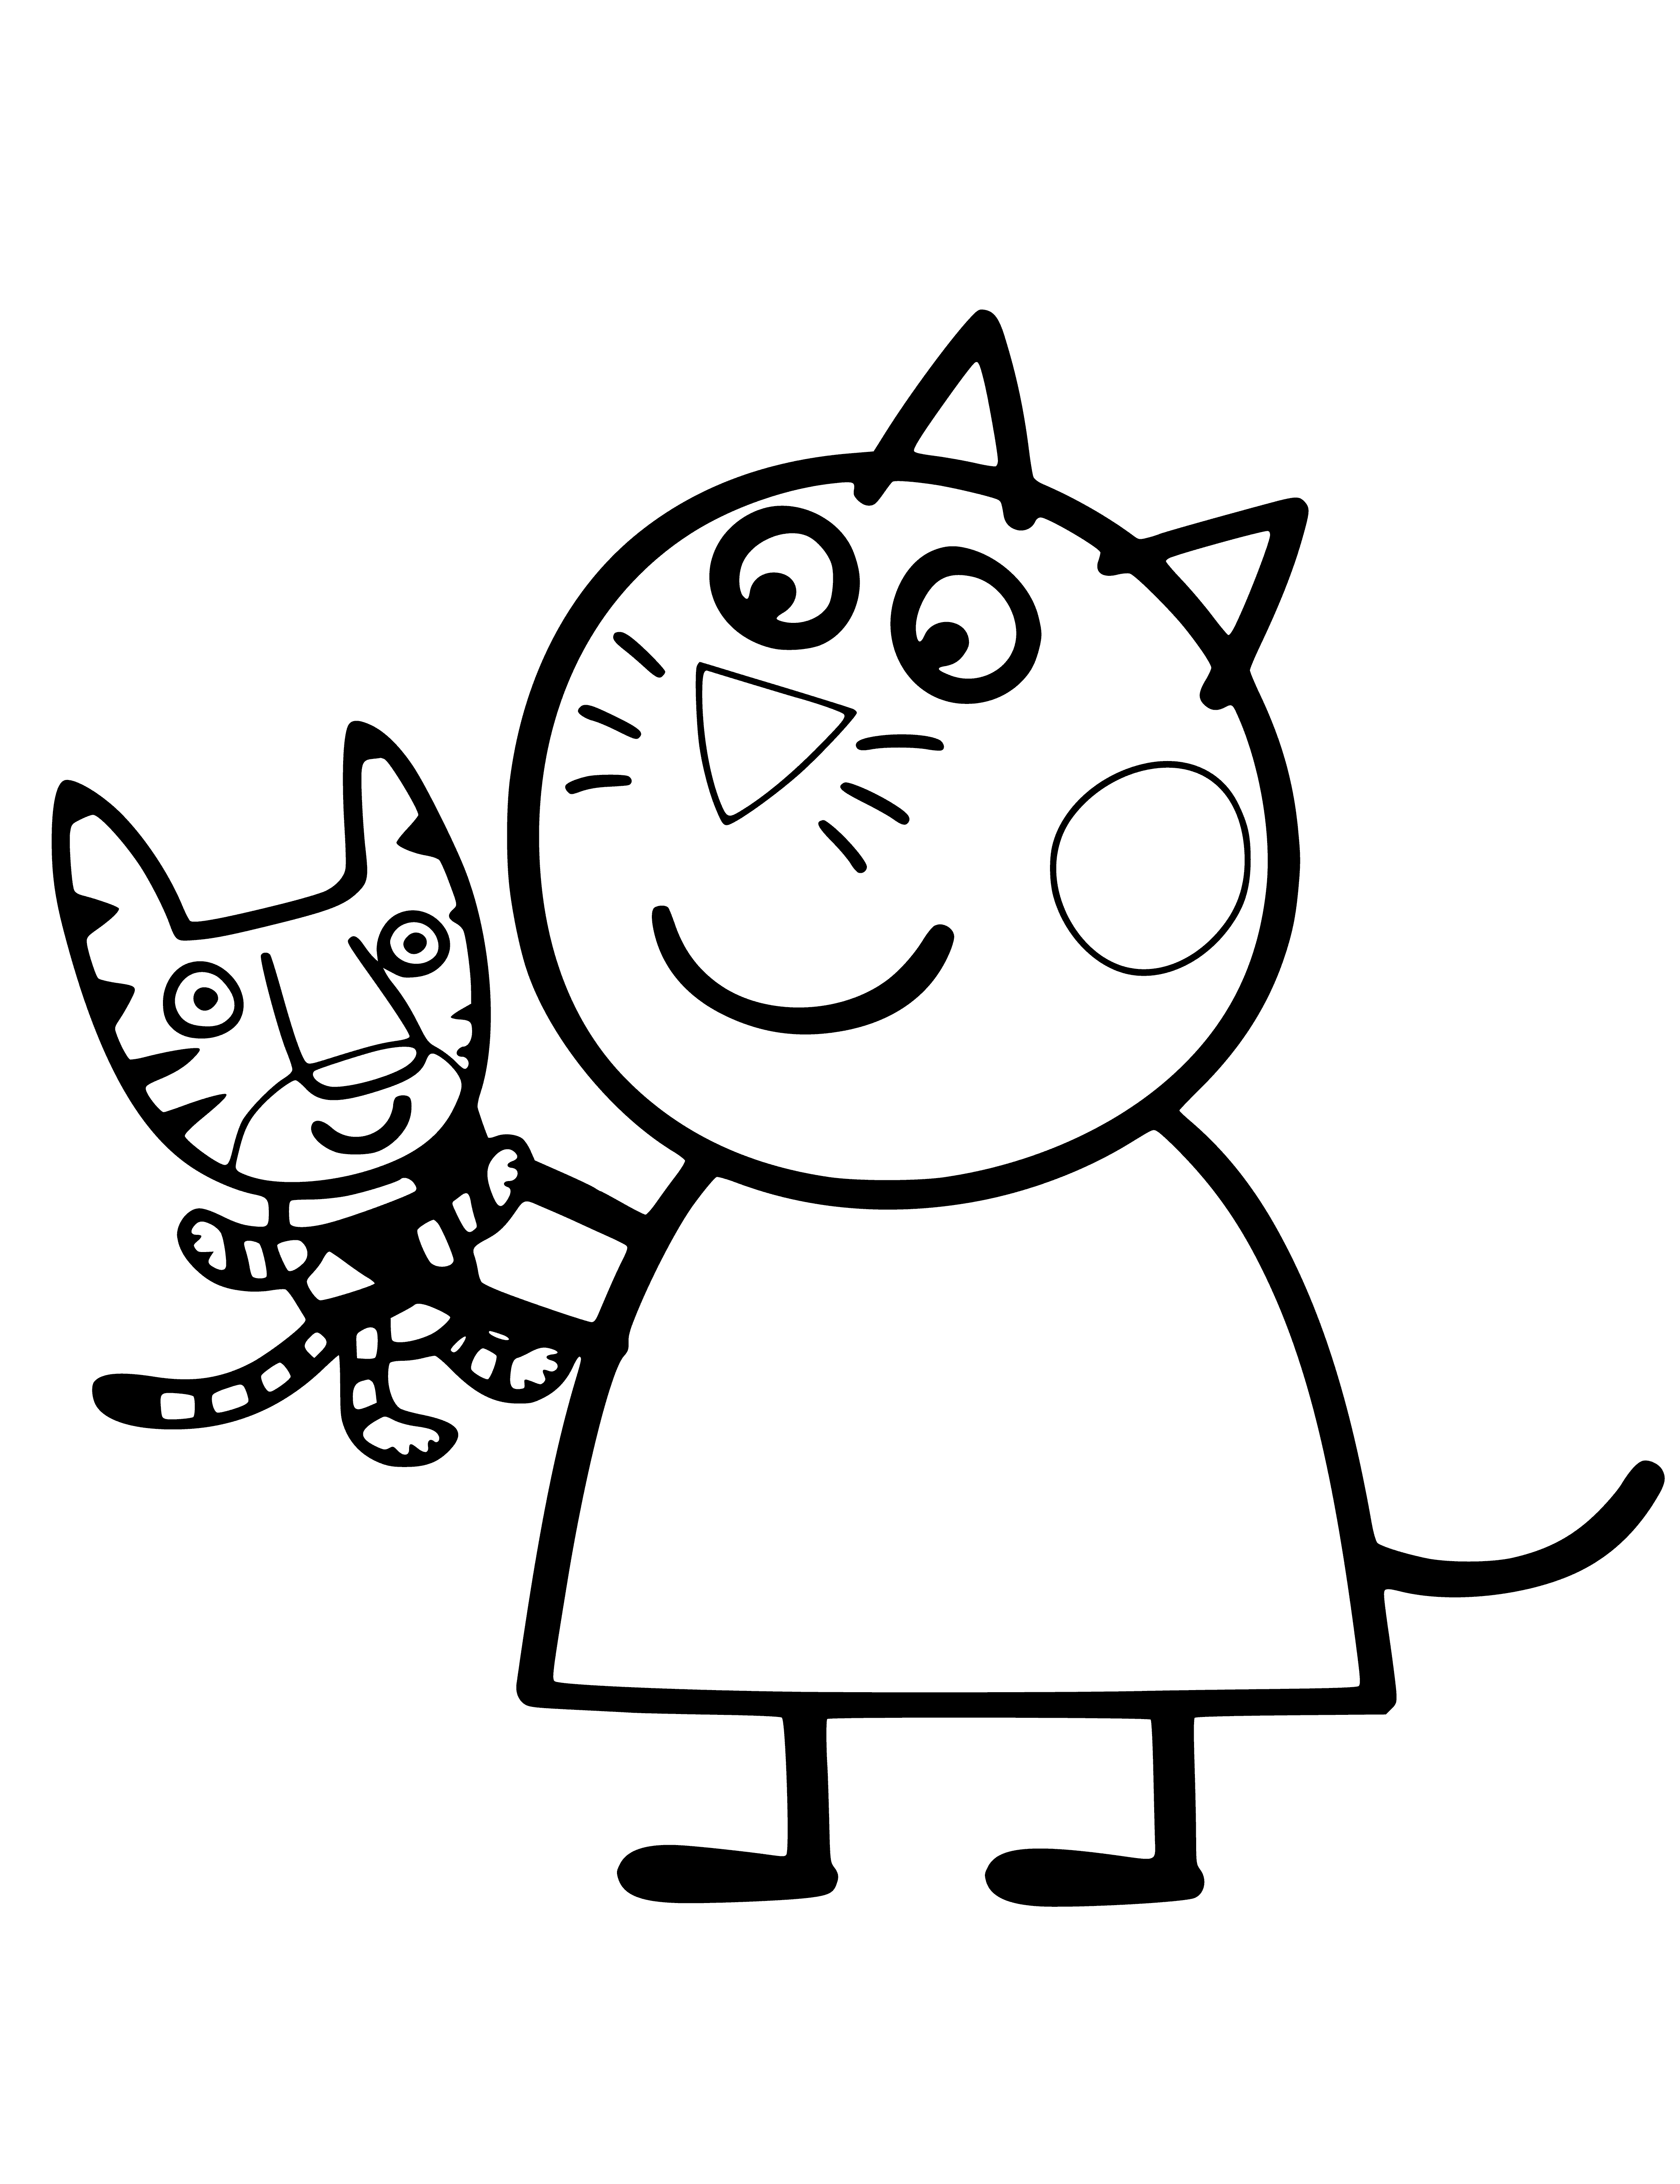 coloring page: A light pink box with a coloring page of Peppa Pig and a yellow bow on top. "Peppa Pig - Cat Candy" written on white against light blue bg.